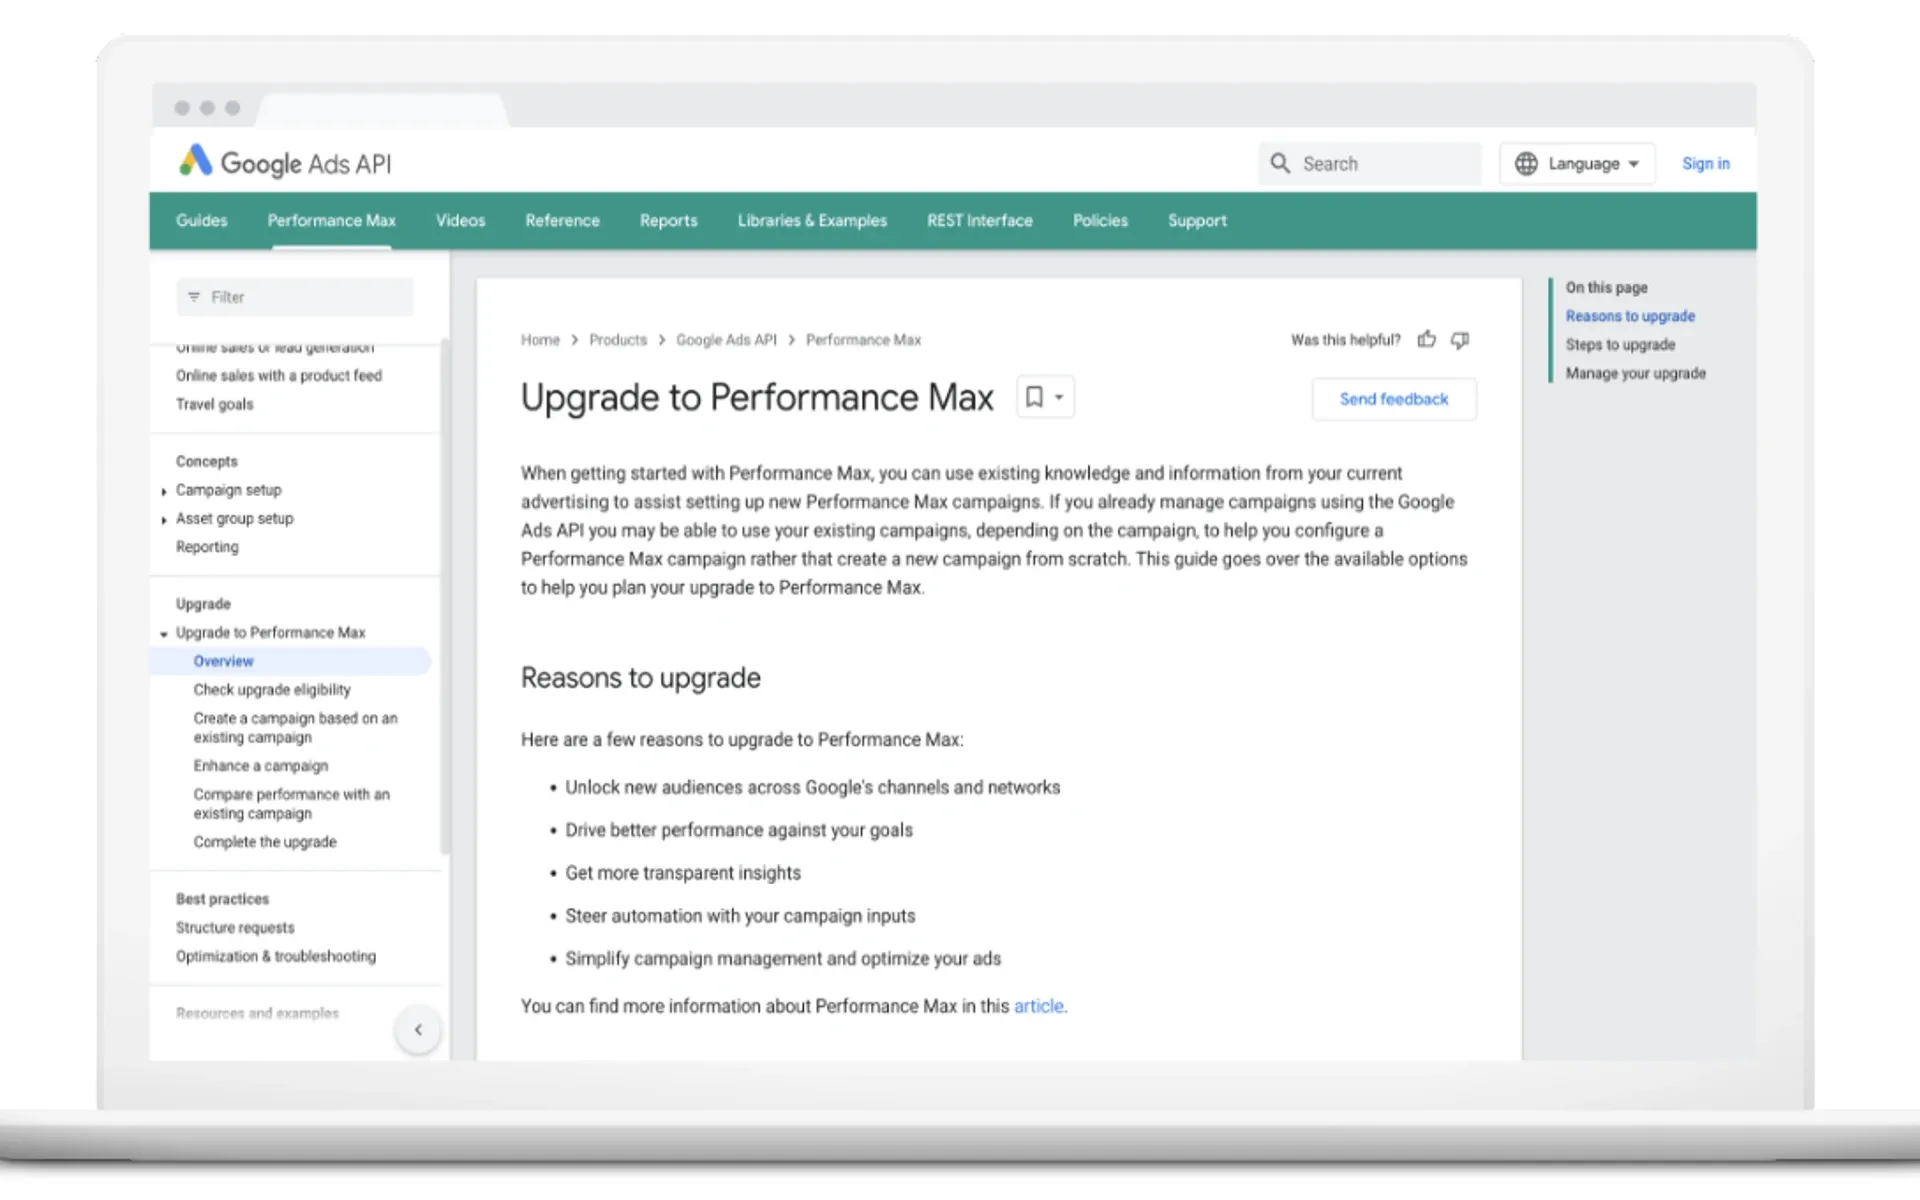 Upgrading your Campaigns to Performance Max